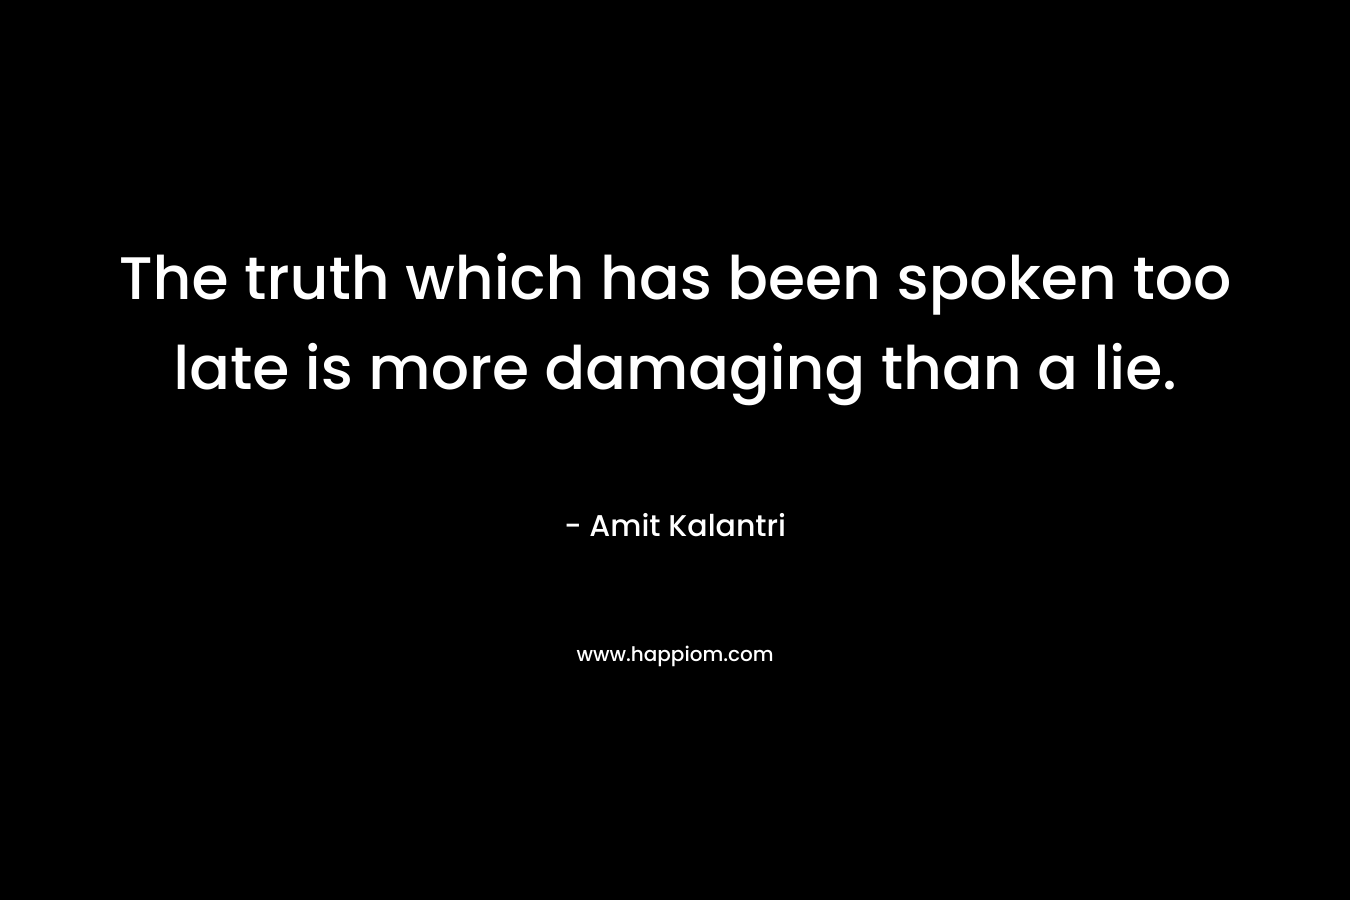 The truth which has been spoken too late is more damaging than a lie.